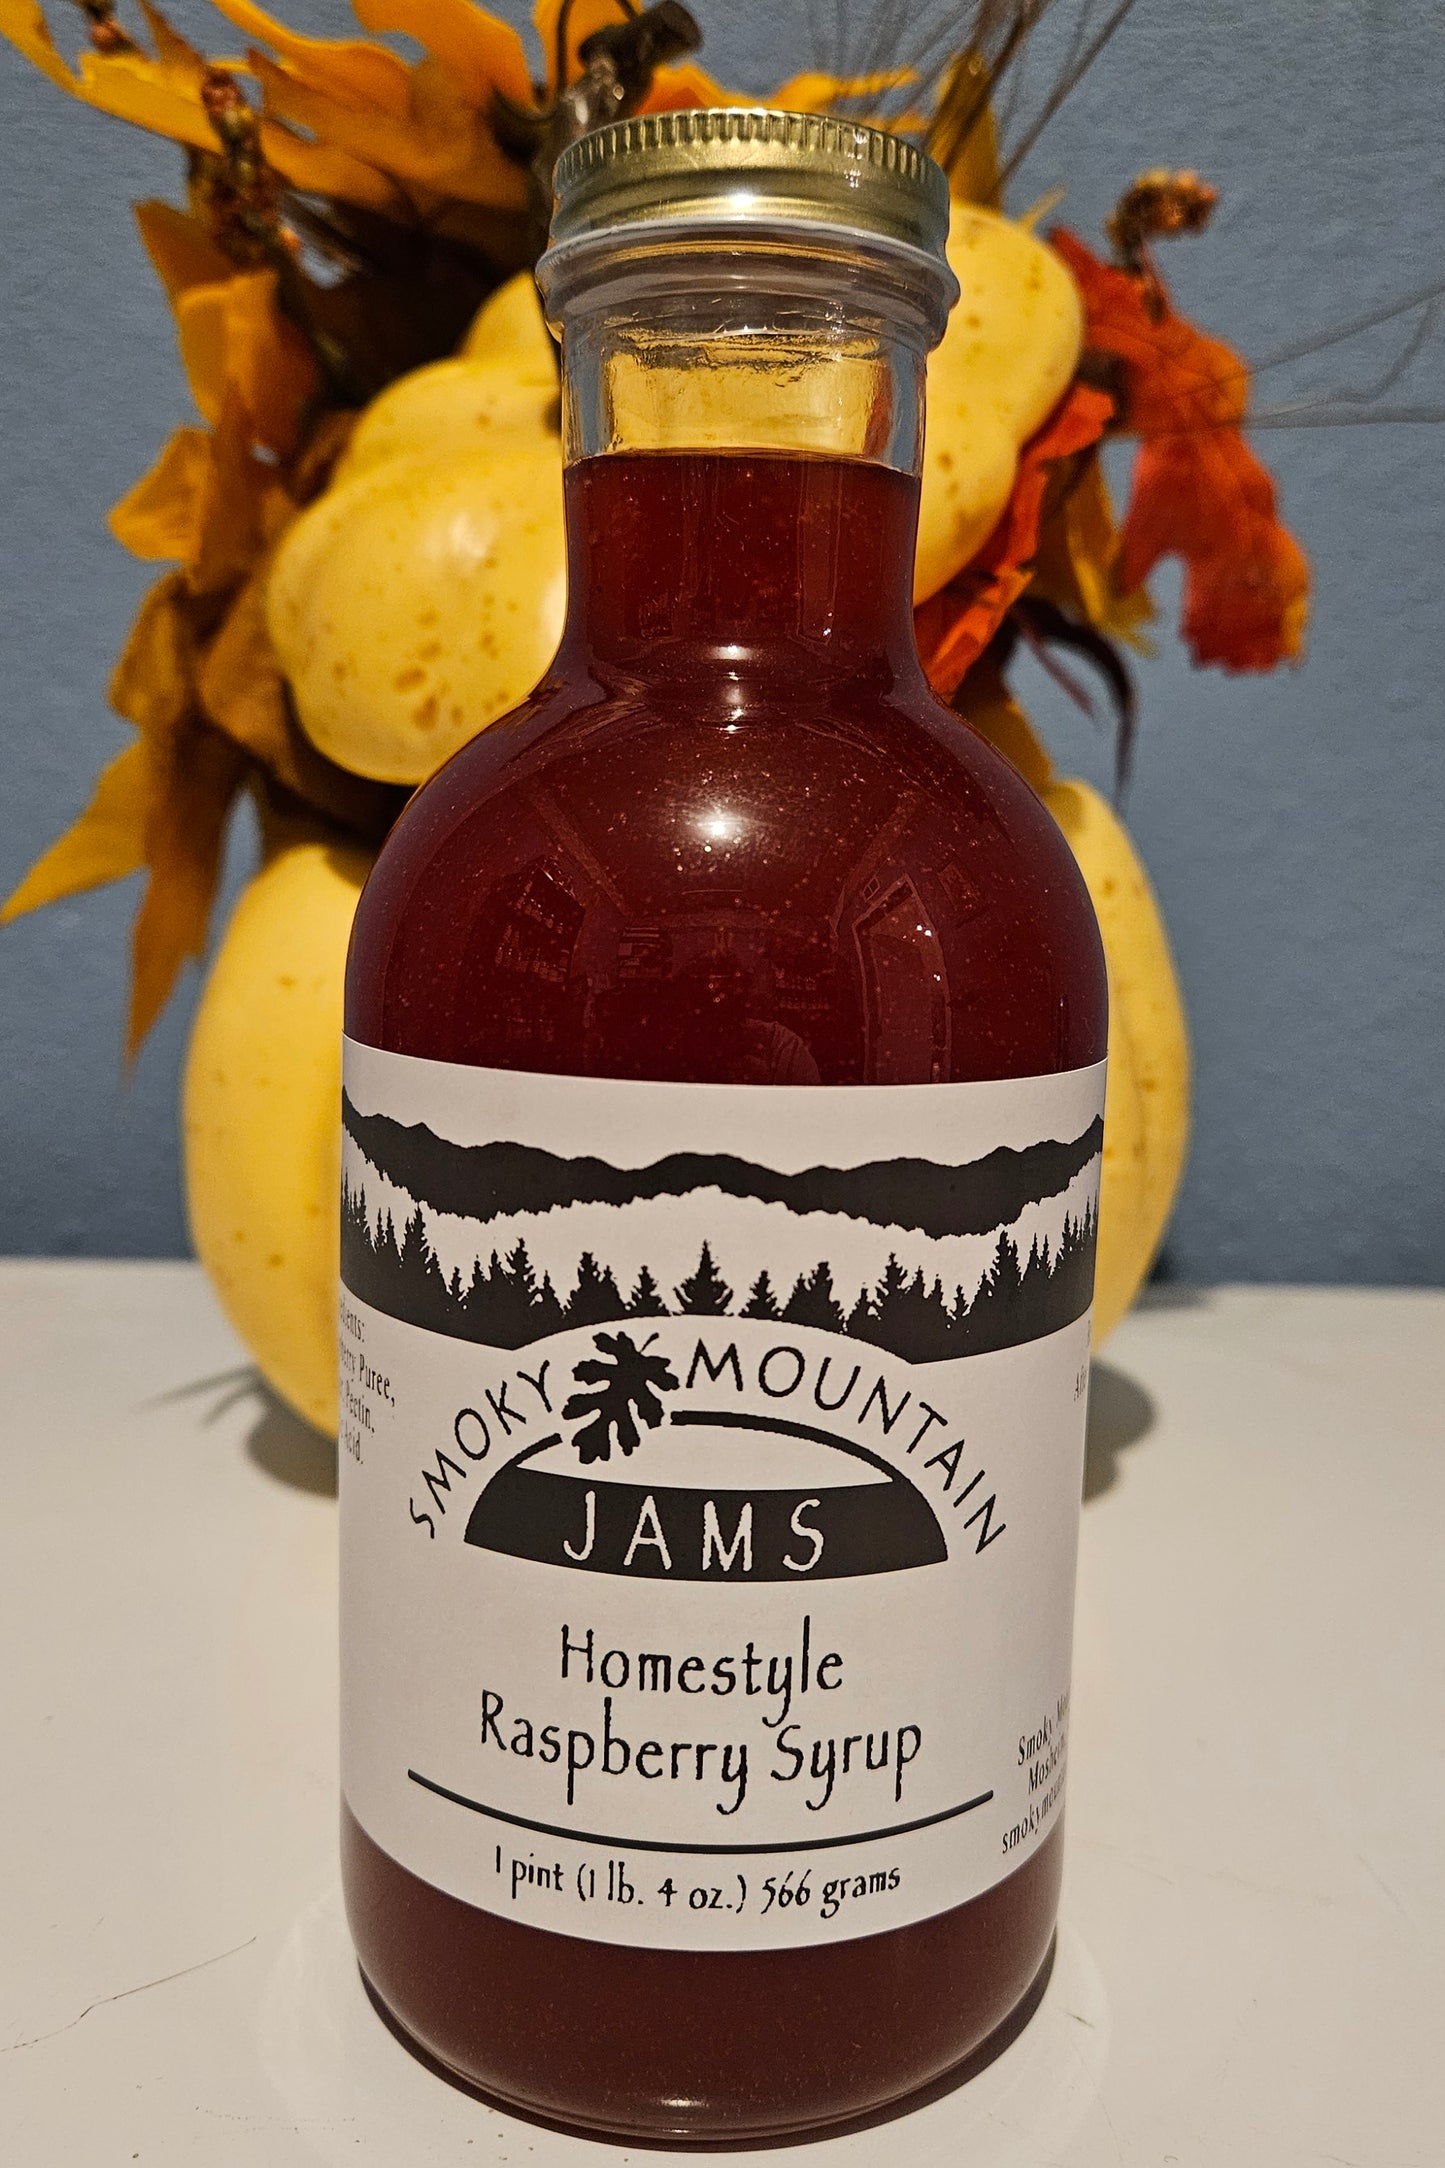 Homestyle Raspberry Fruit Syrup